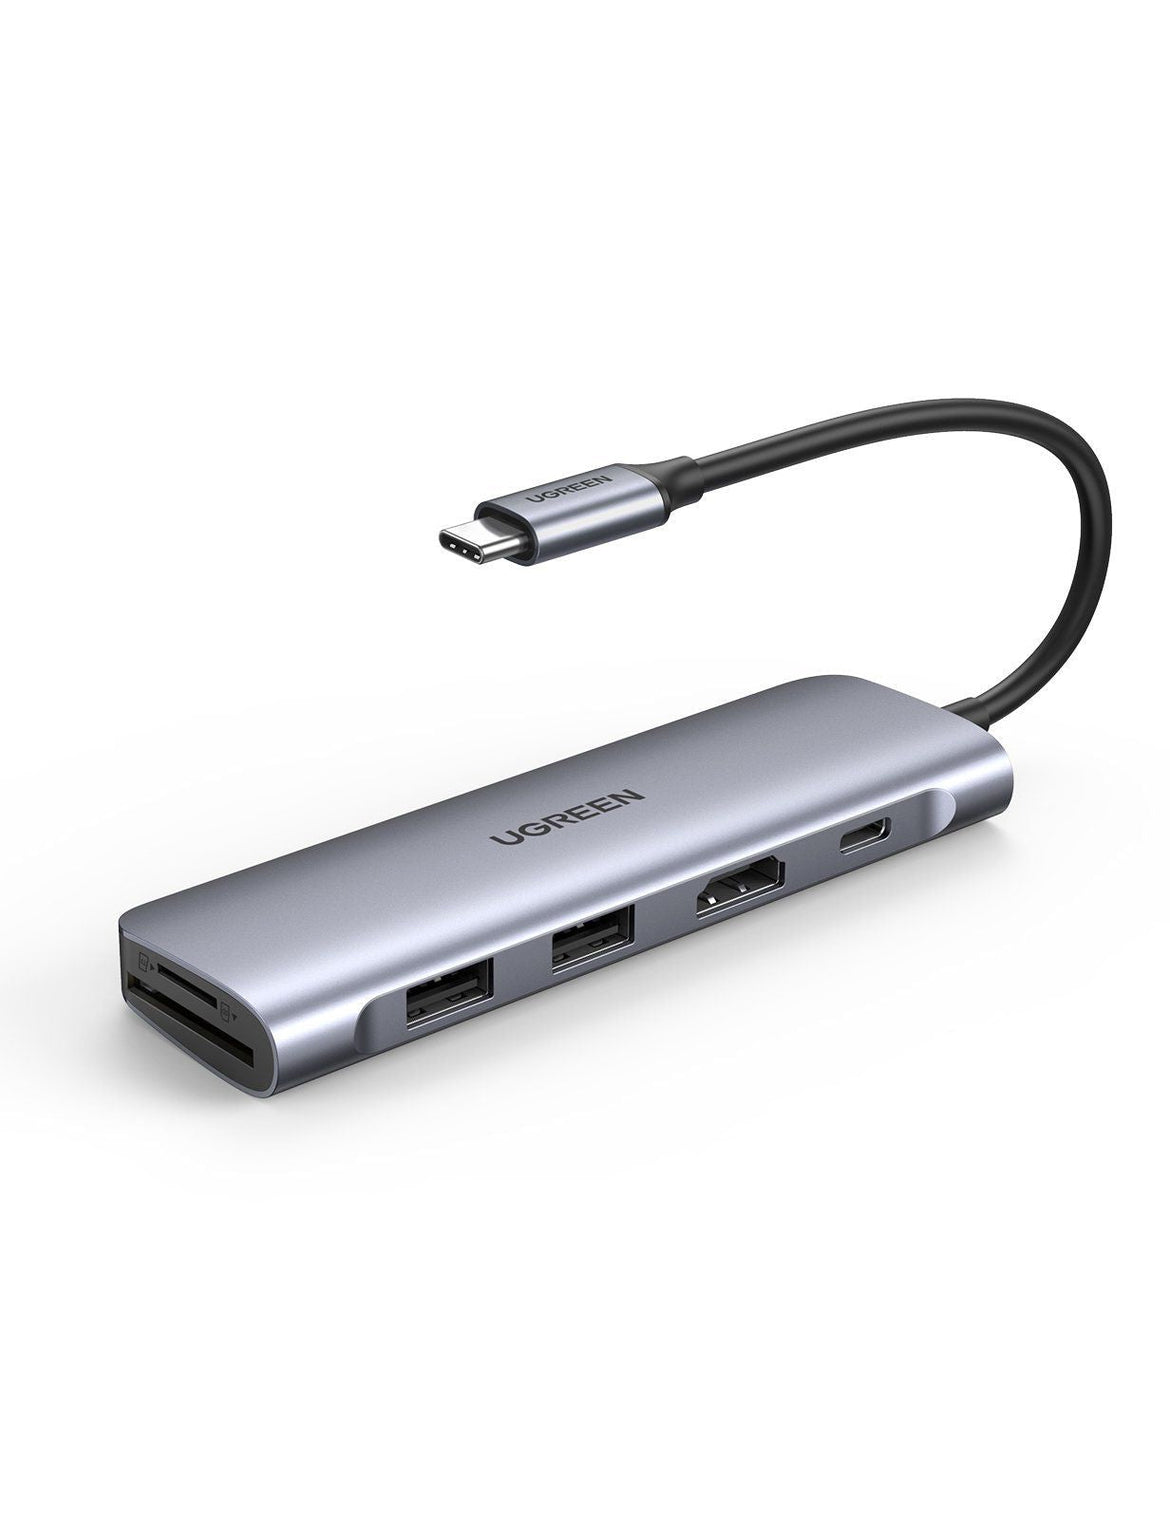 UGREEN 6-In-1 USB C PD Adapter With 4K HDMI Hub - 70411 CM195